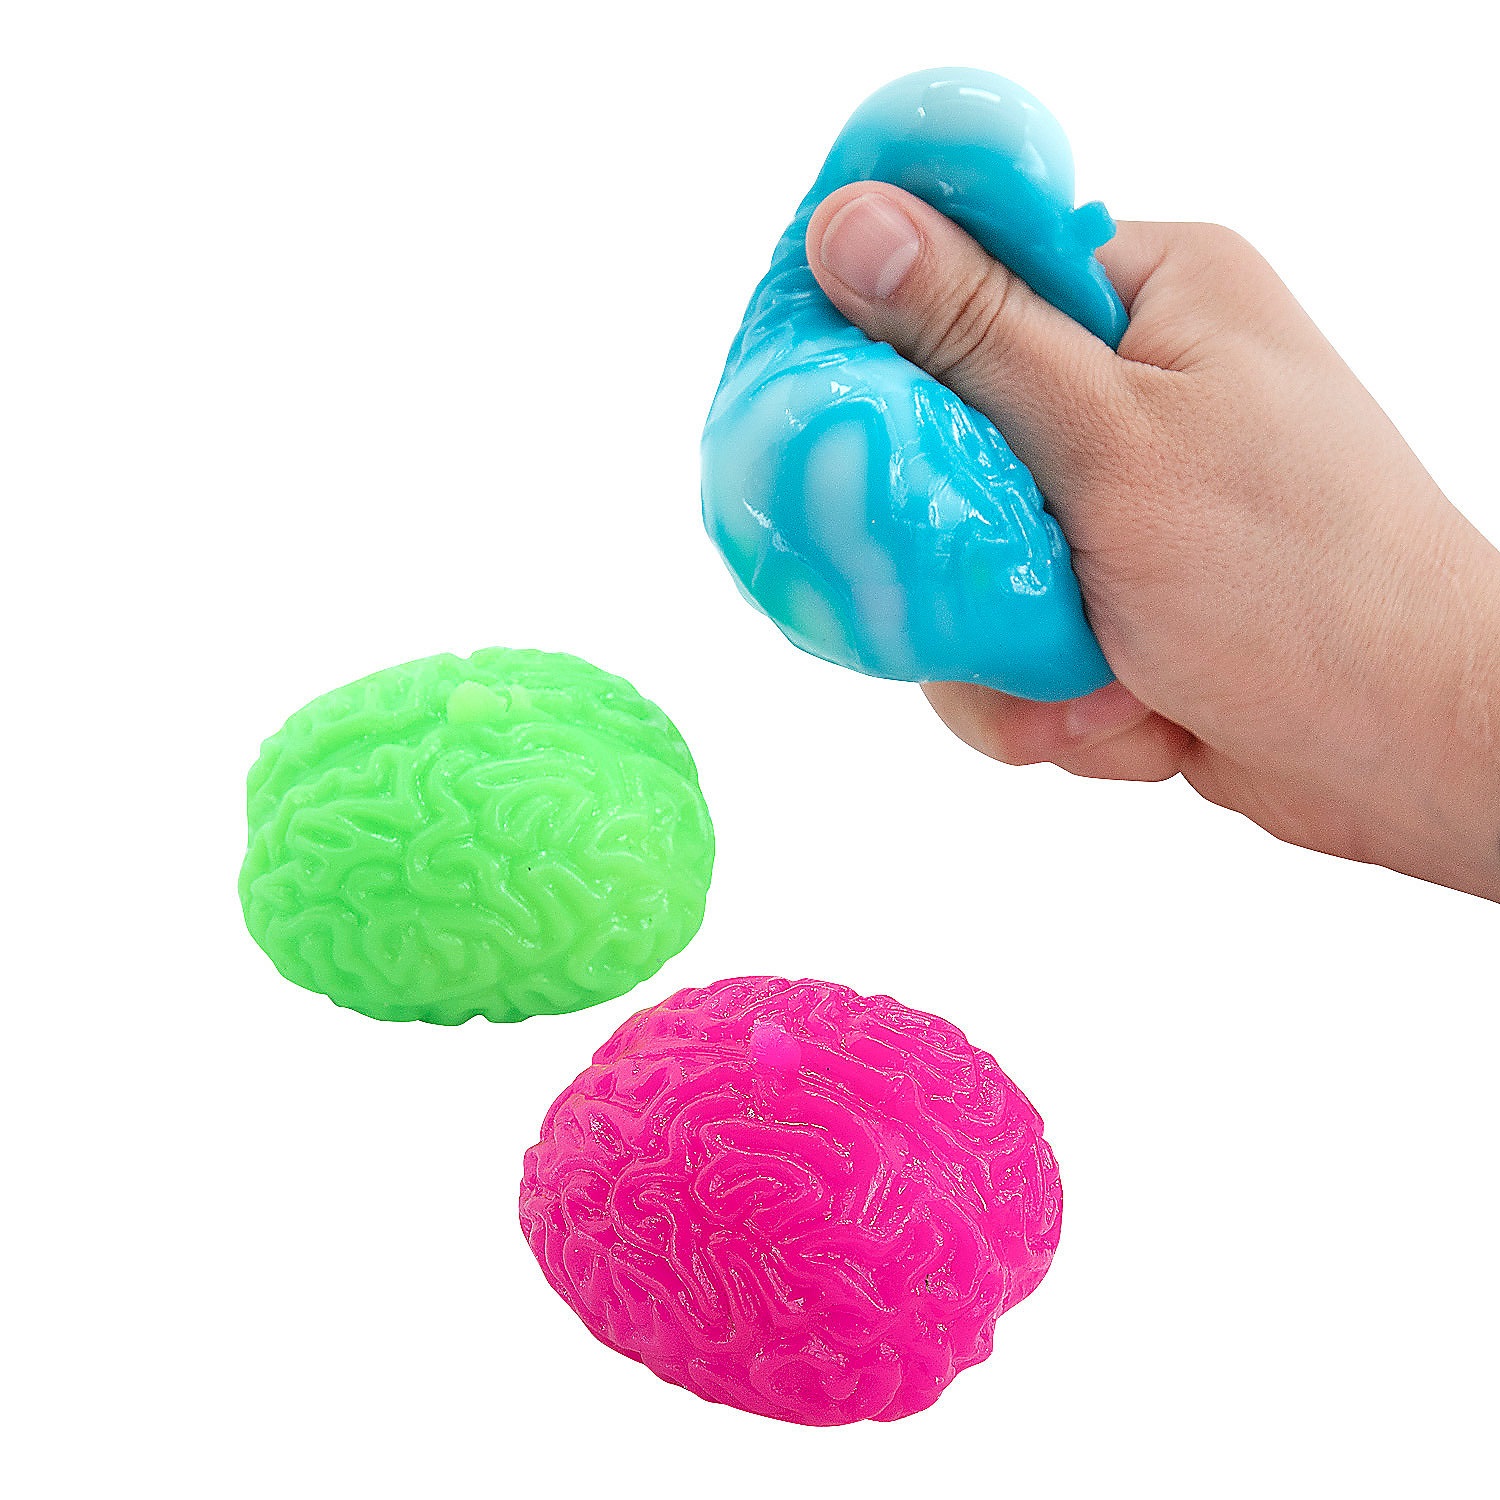 brain-squeeze-toys-12-pc-_13962360